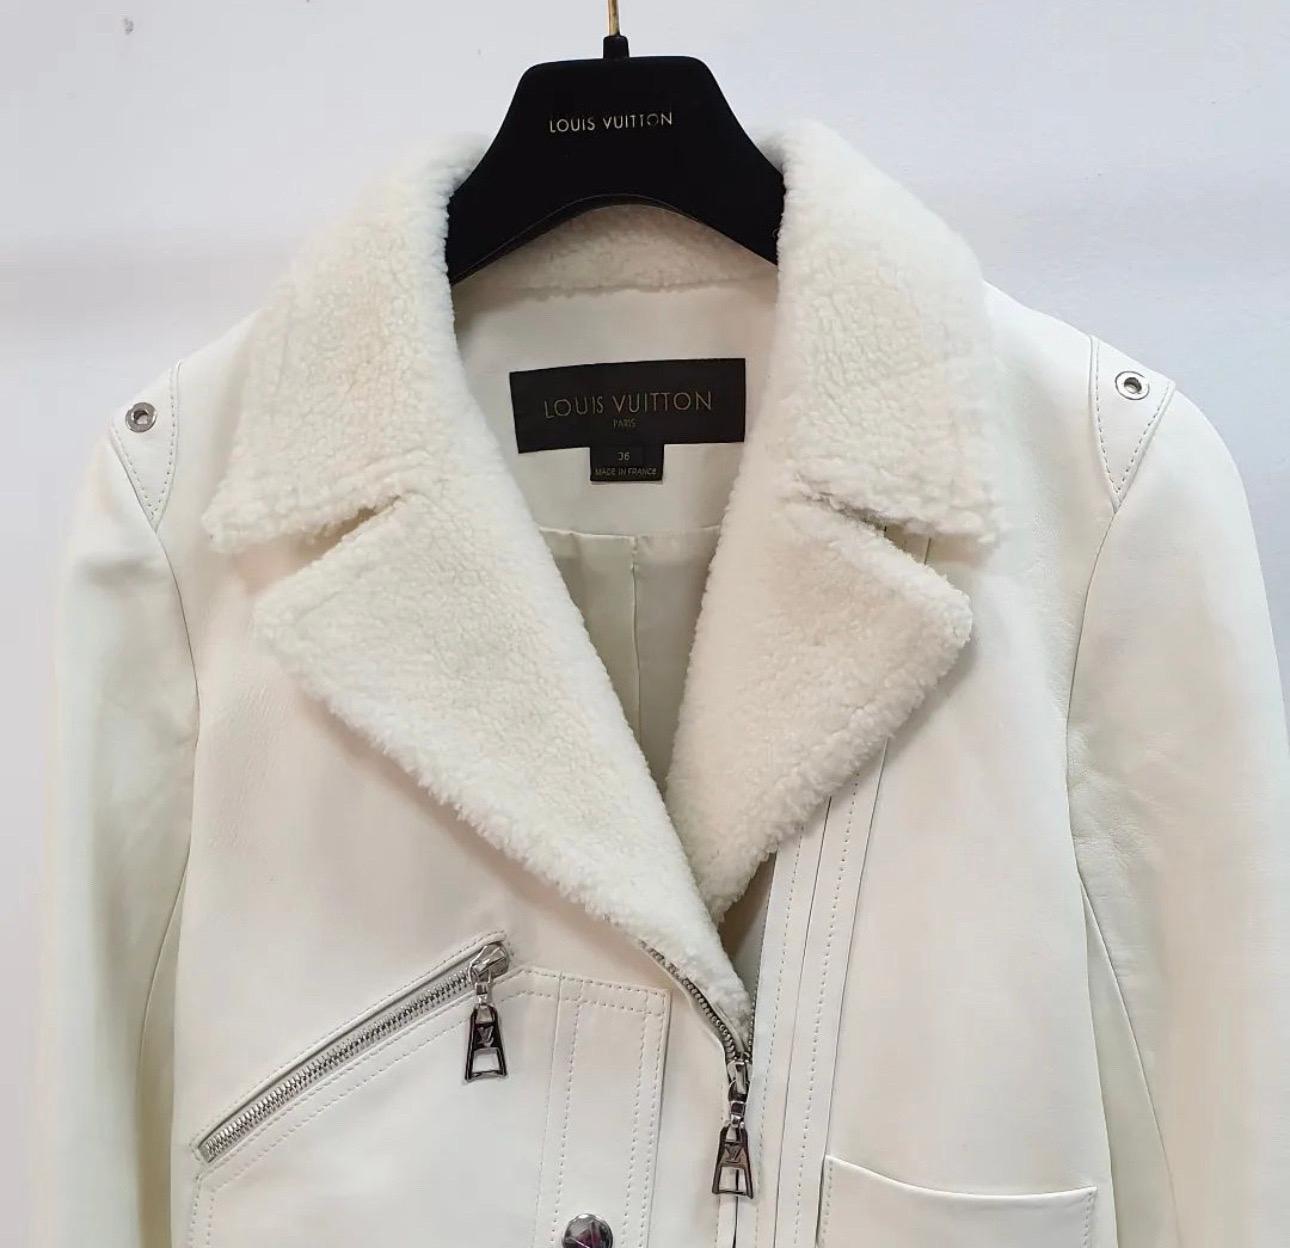 Absolutely gorgeous stunning classy sexy and chic Louis Vuitton biker jacket. I
t’s like an ivory color.
100% lamb skin, 50%viscose 50% cupro 
Sz.36
Very good condition.
Hanger is not included.
